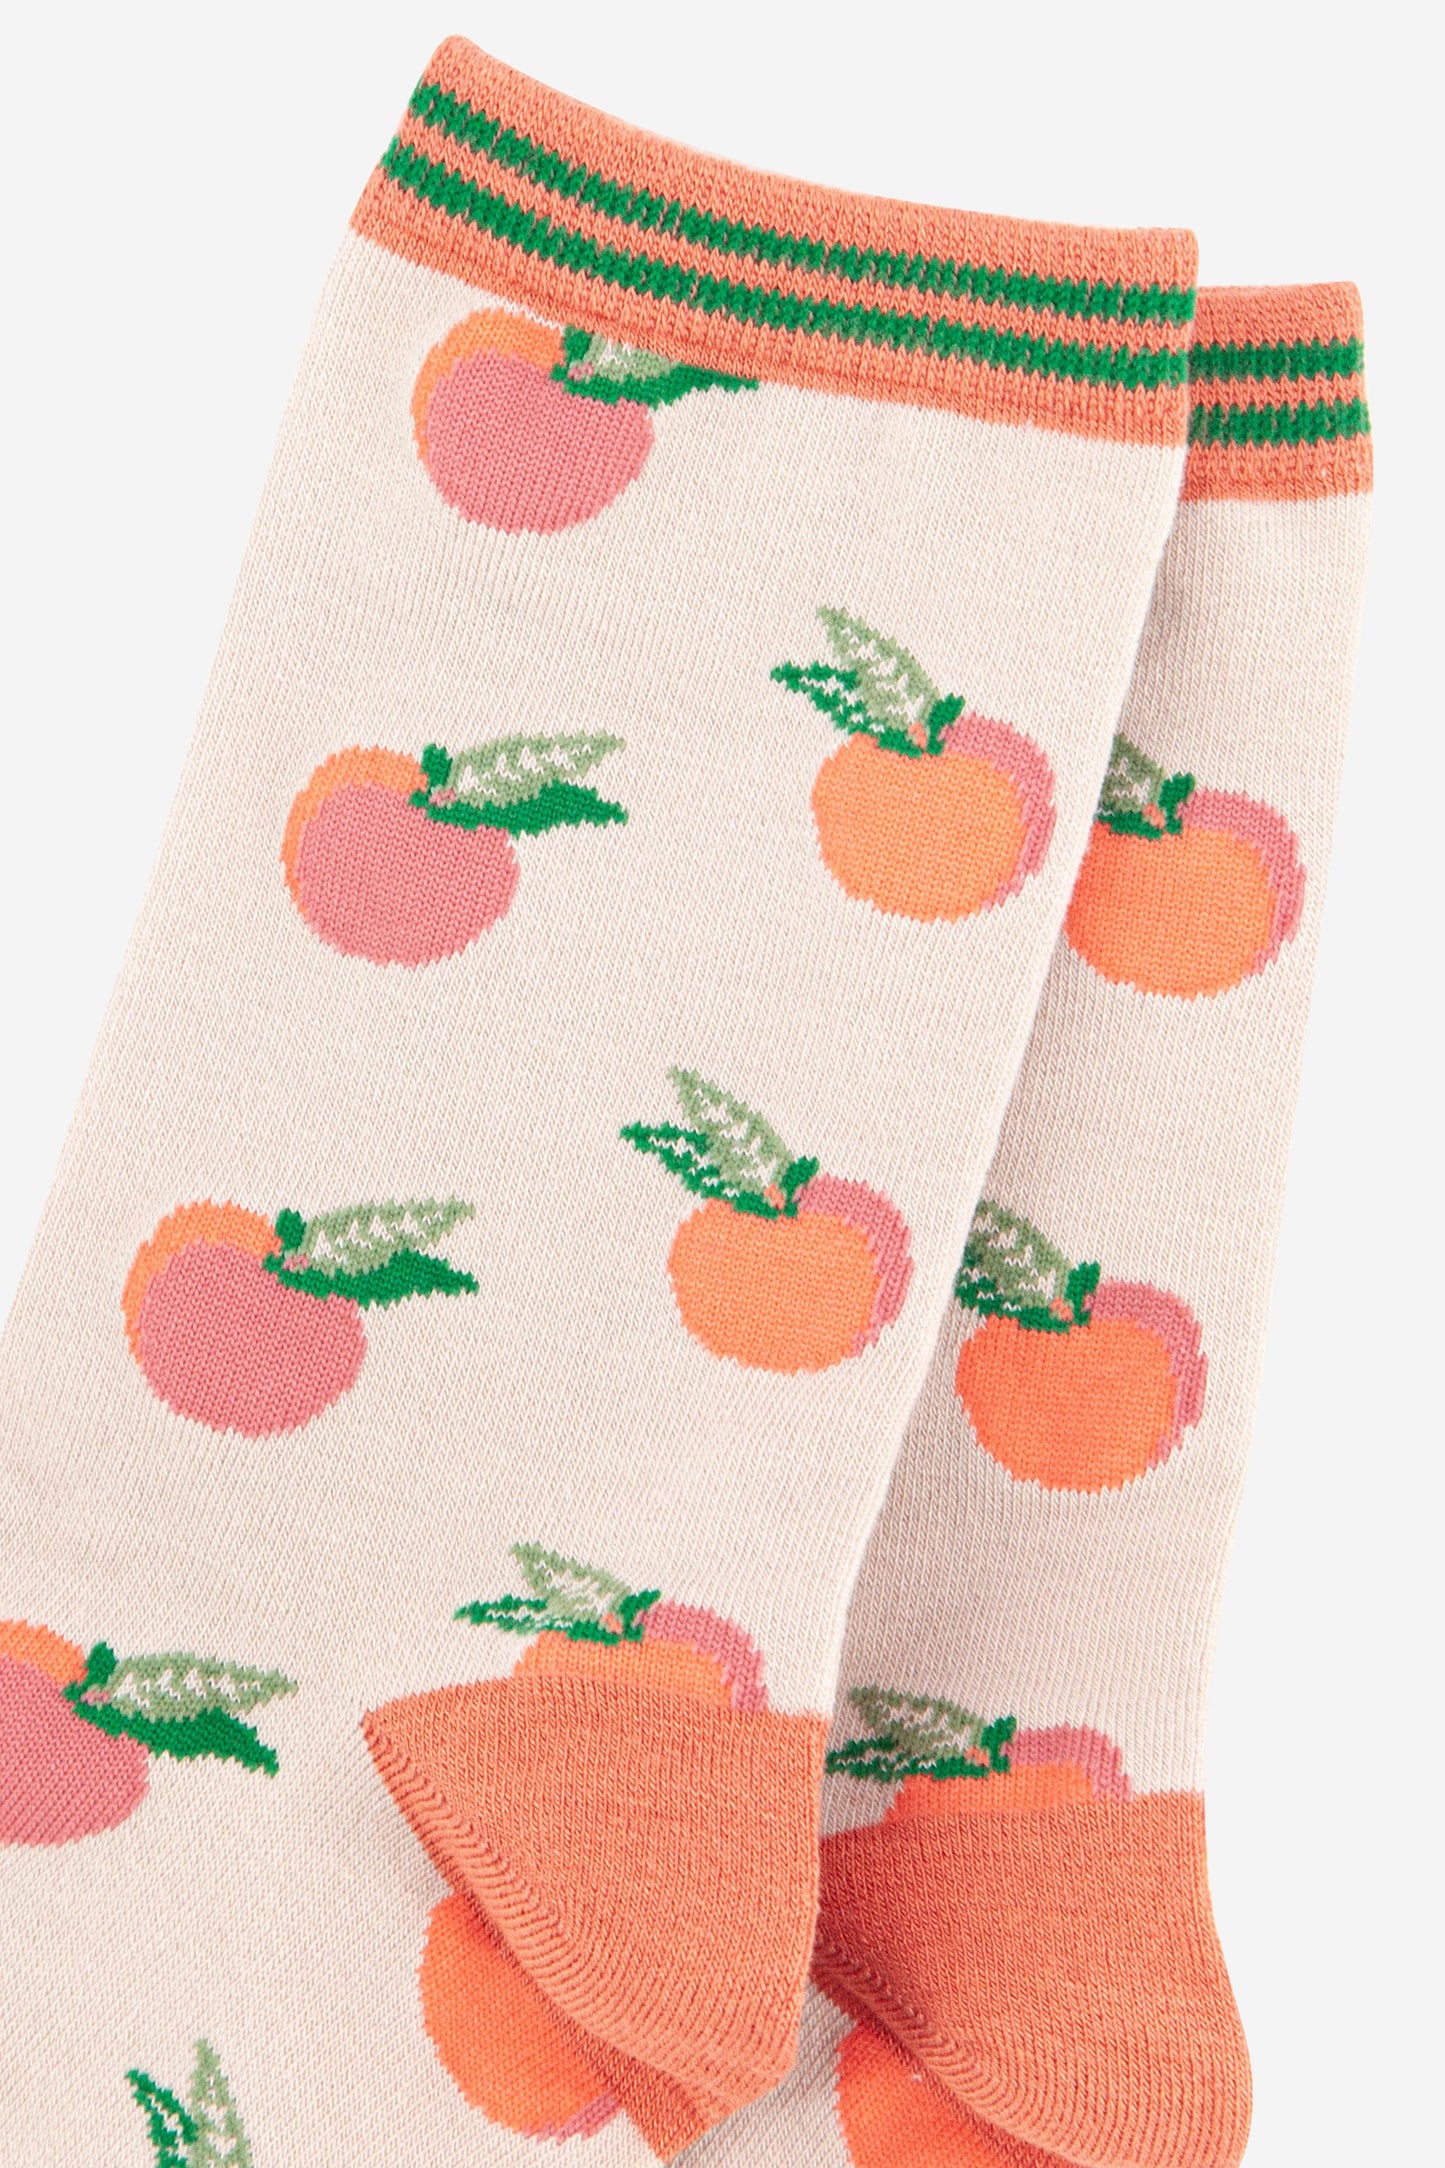 close up of the peach fruit pattern on the ankle of the socks